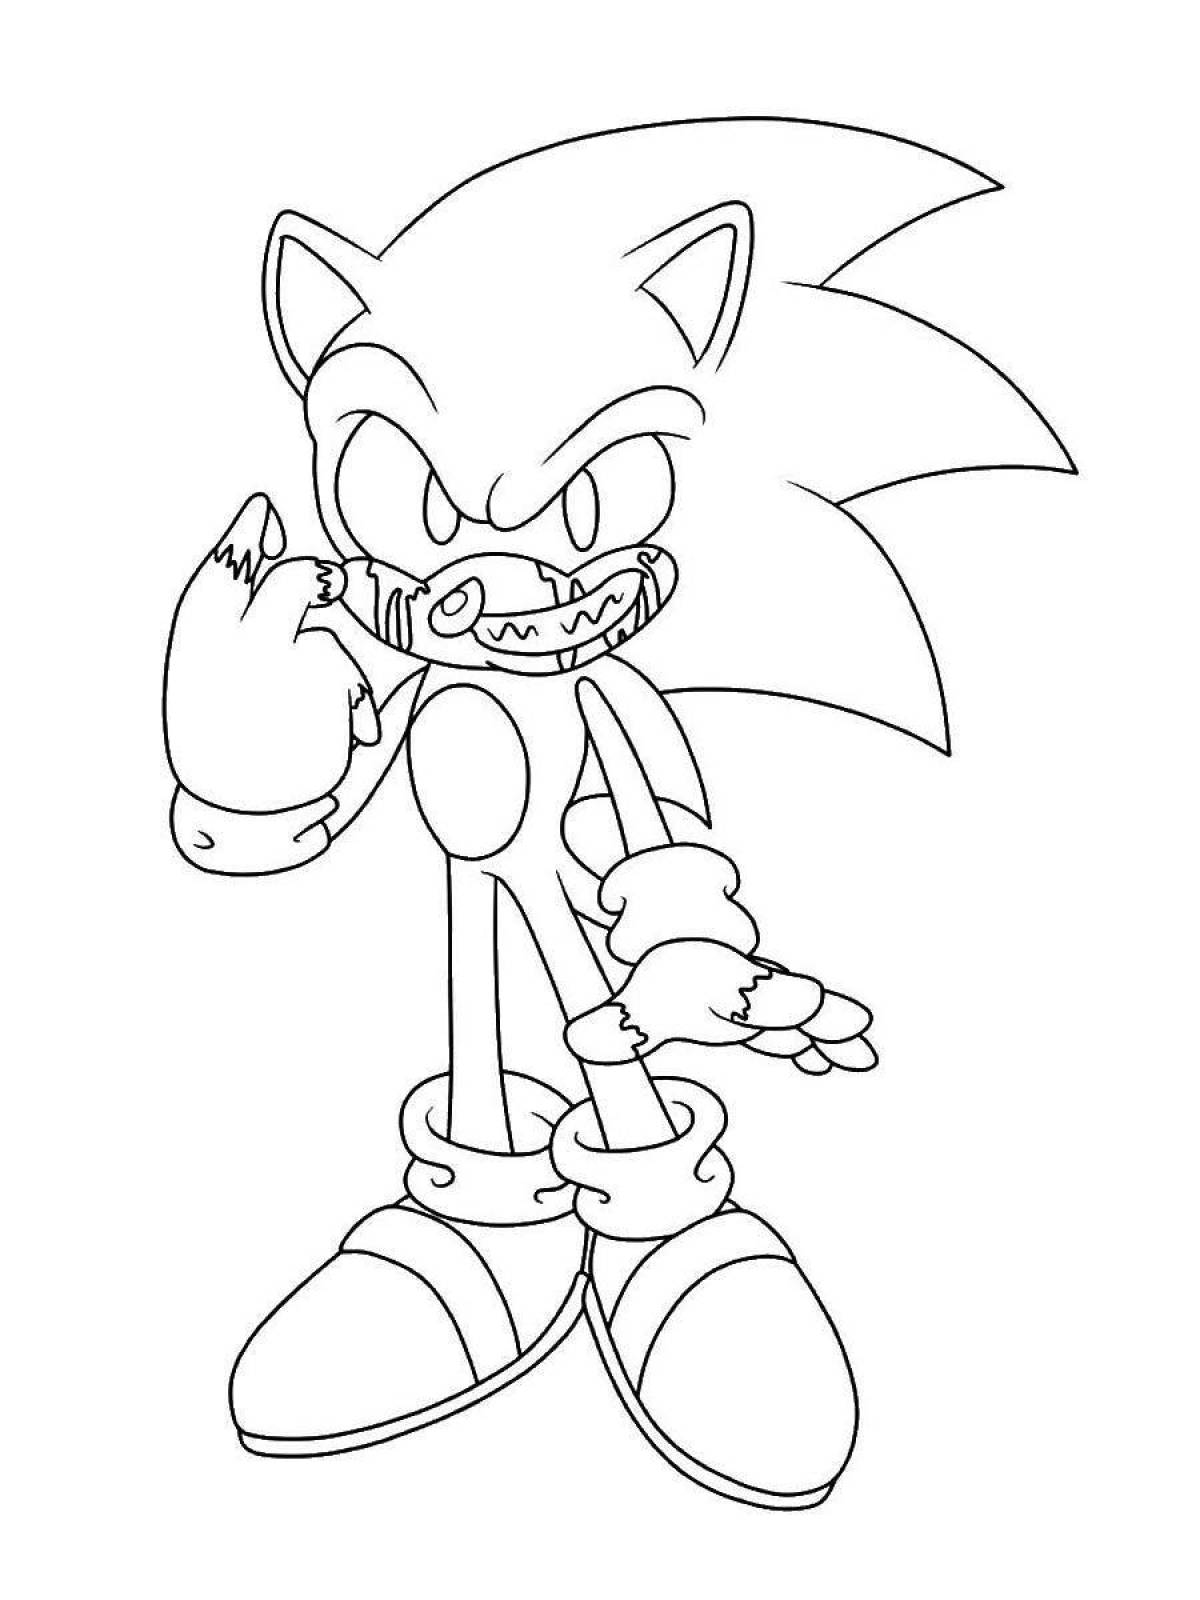 Sonicexe fnf fun coloring